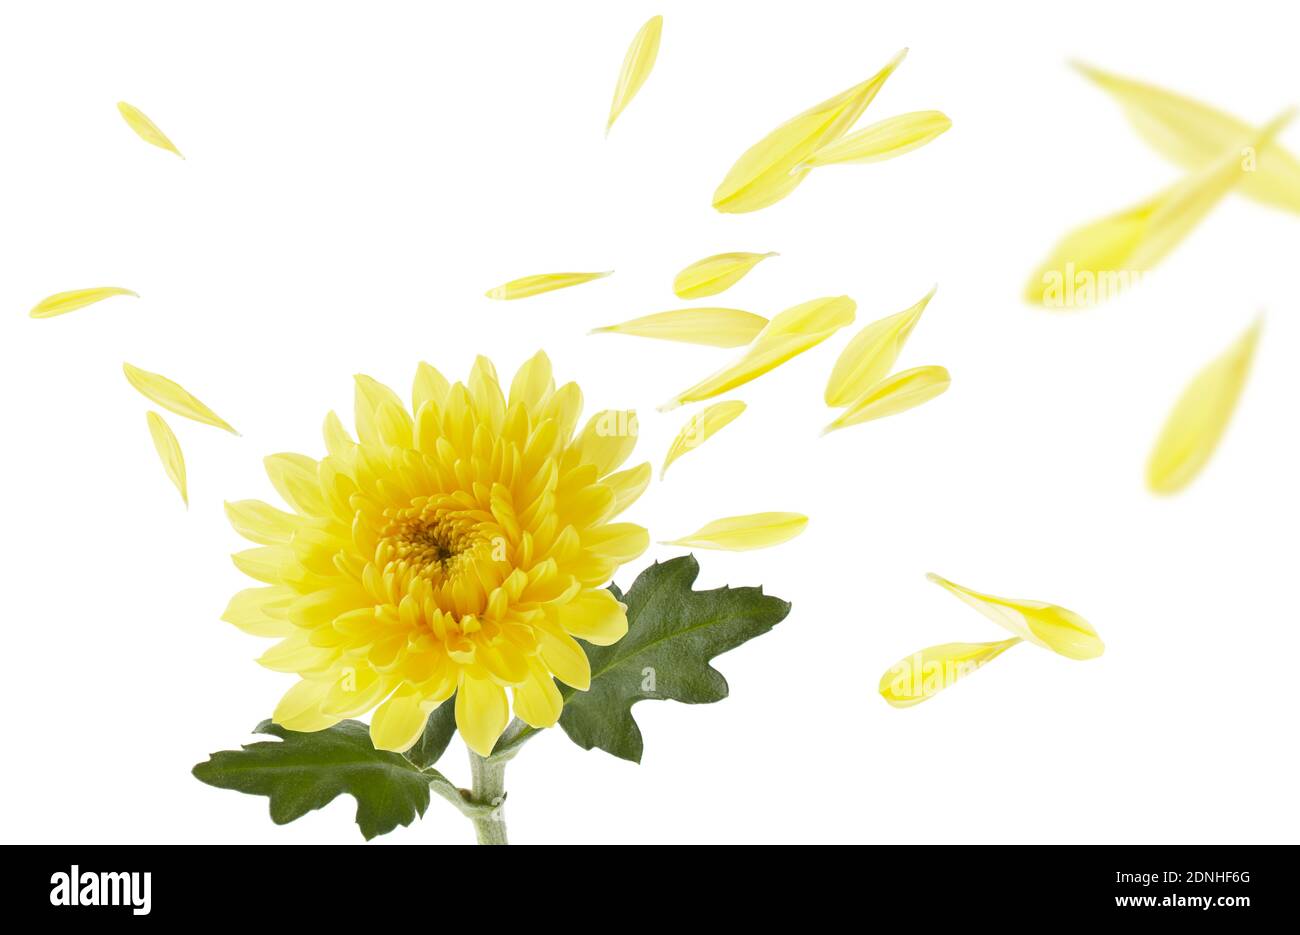 chrysanthemum with stem and leaves, petals flying Stock Photo